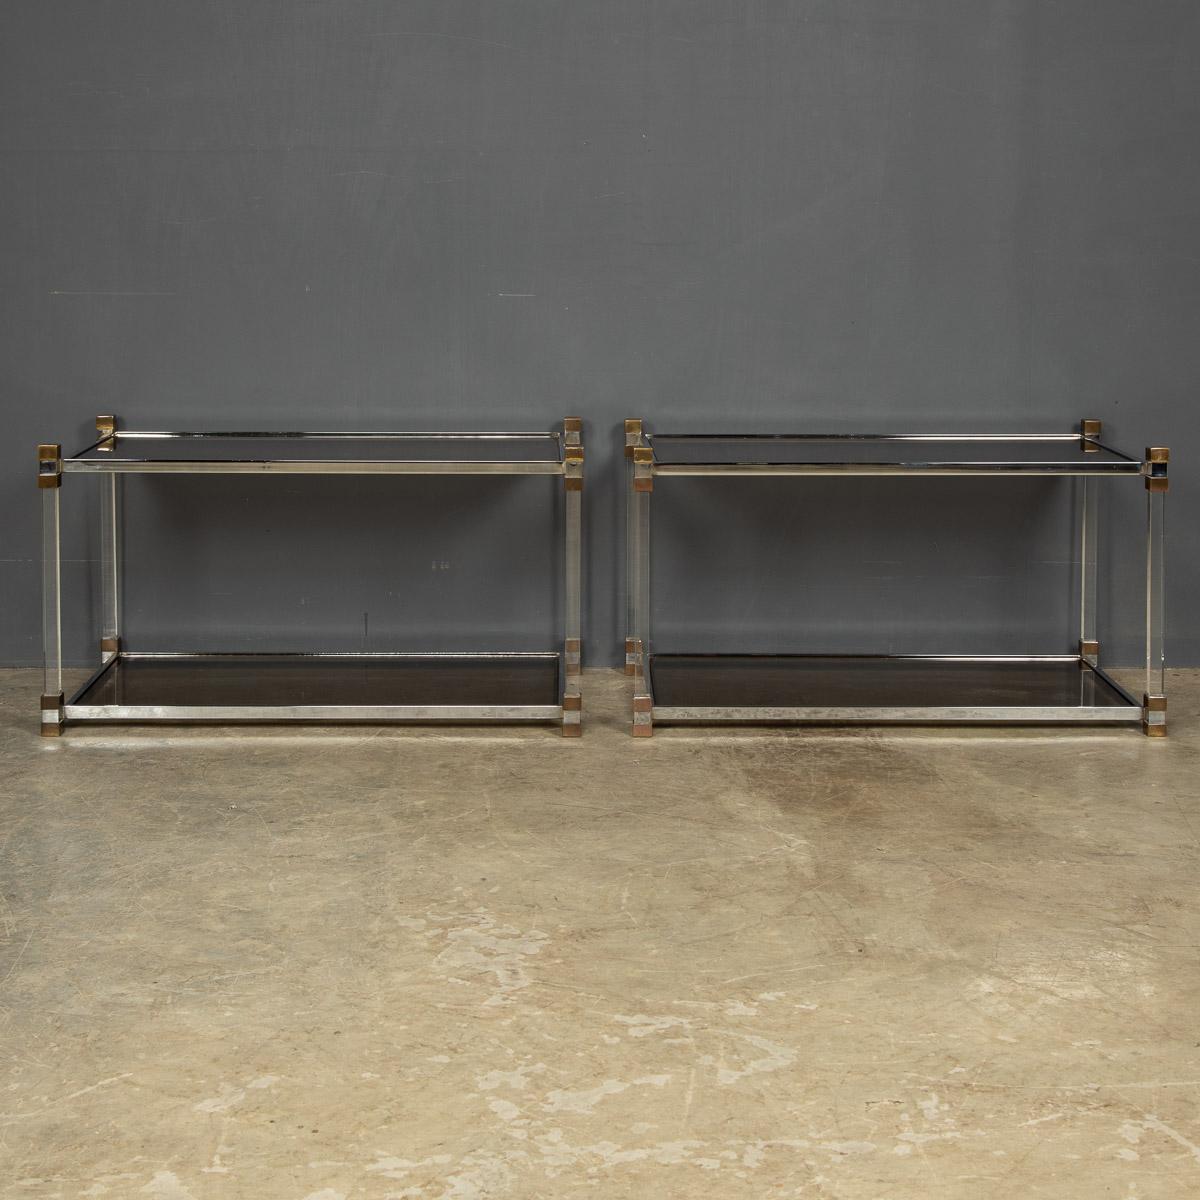 A pair of 20th Century French side tables with lucite and brass frames with two smoked glass shelves, circa 1970's.

CONDITION
In Good Condition - wear consistent with age, (please refer to photographs).

SIZE
Width: 80cm
Height: 44cm
Depth: 42cm